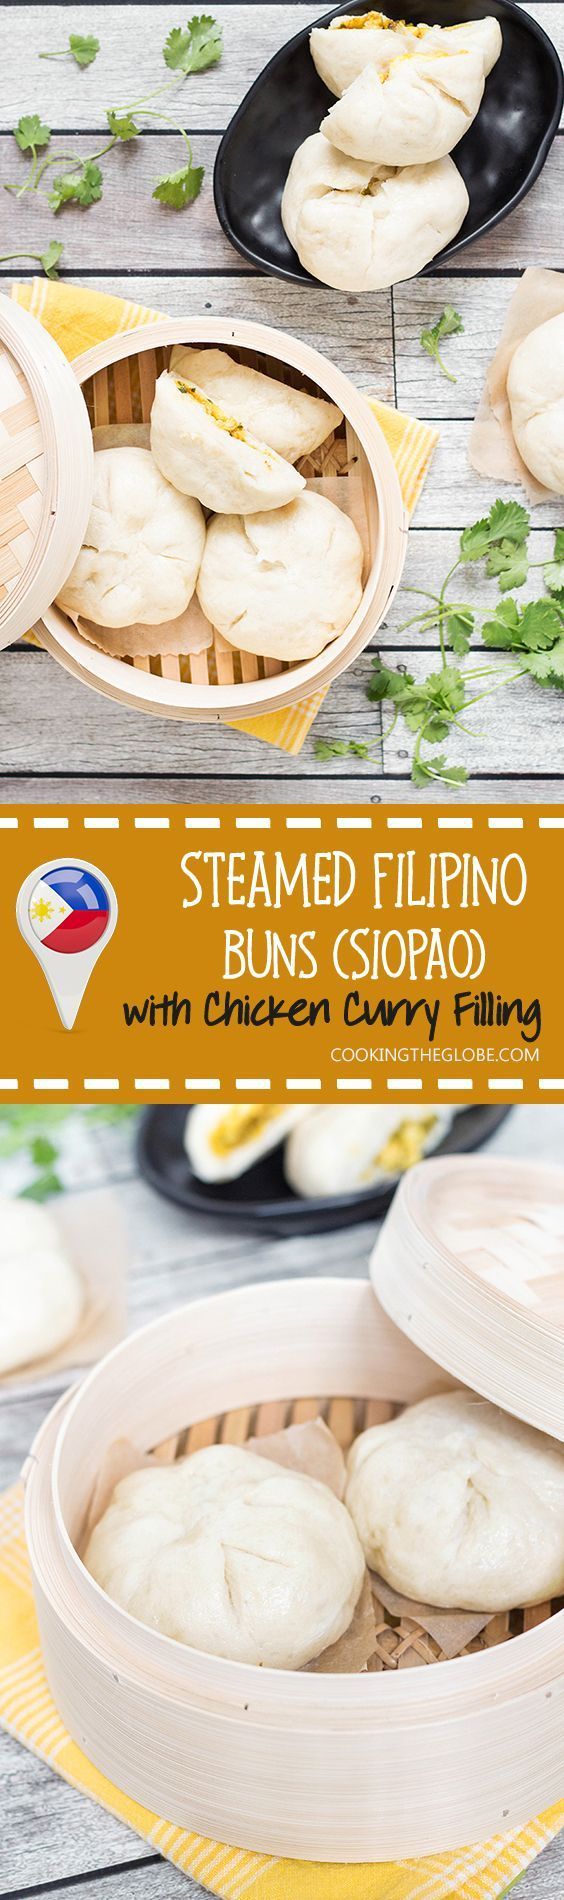 Steamed Filipino Buns (Siopao with Chicken Curry Filling